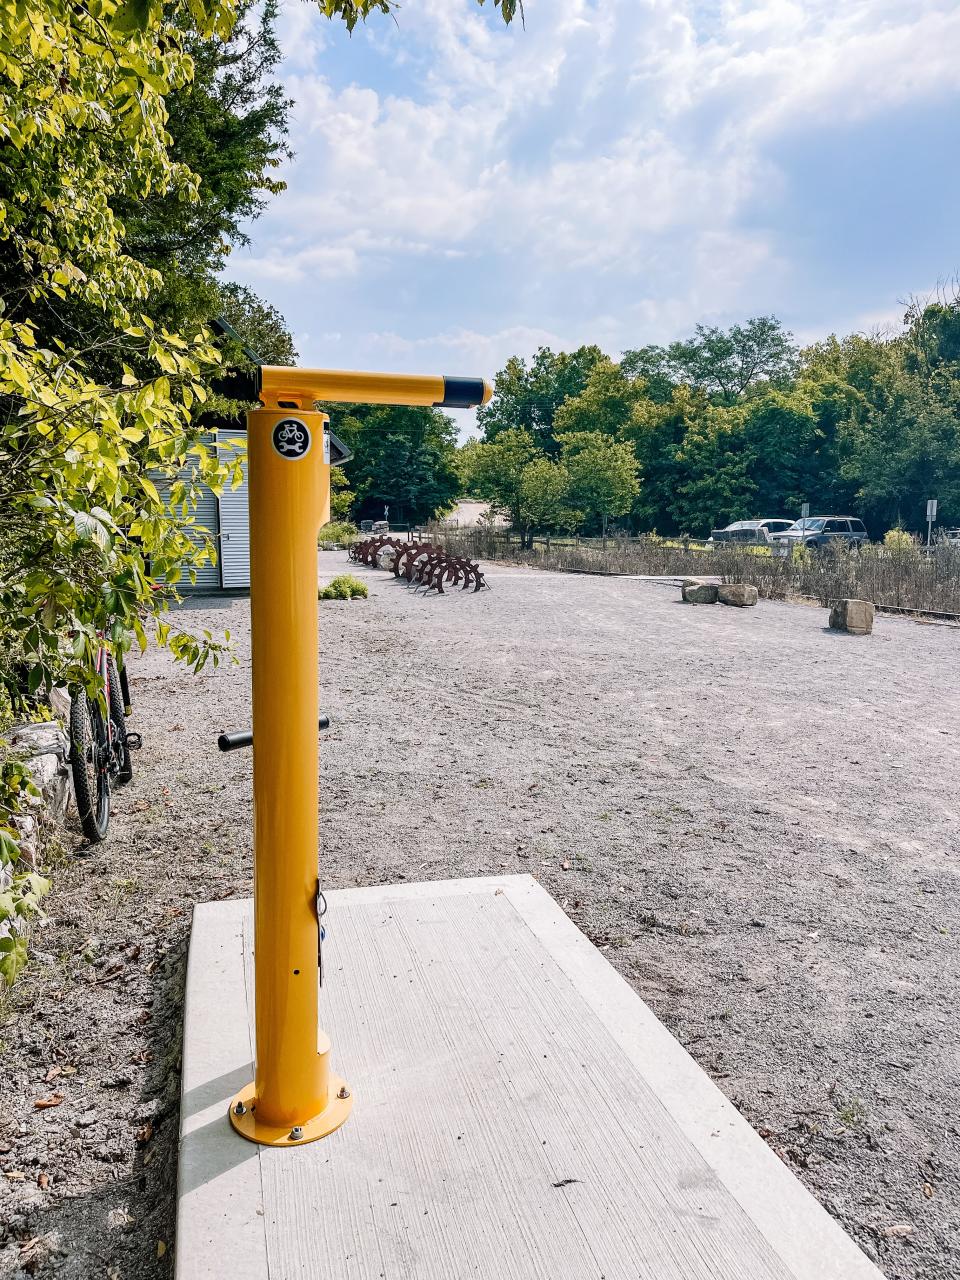 The new community bike repair stand is available for the public to use near Mead’s Quarry at Ijams Nature Center on Aug. 15, 2022.